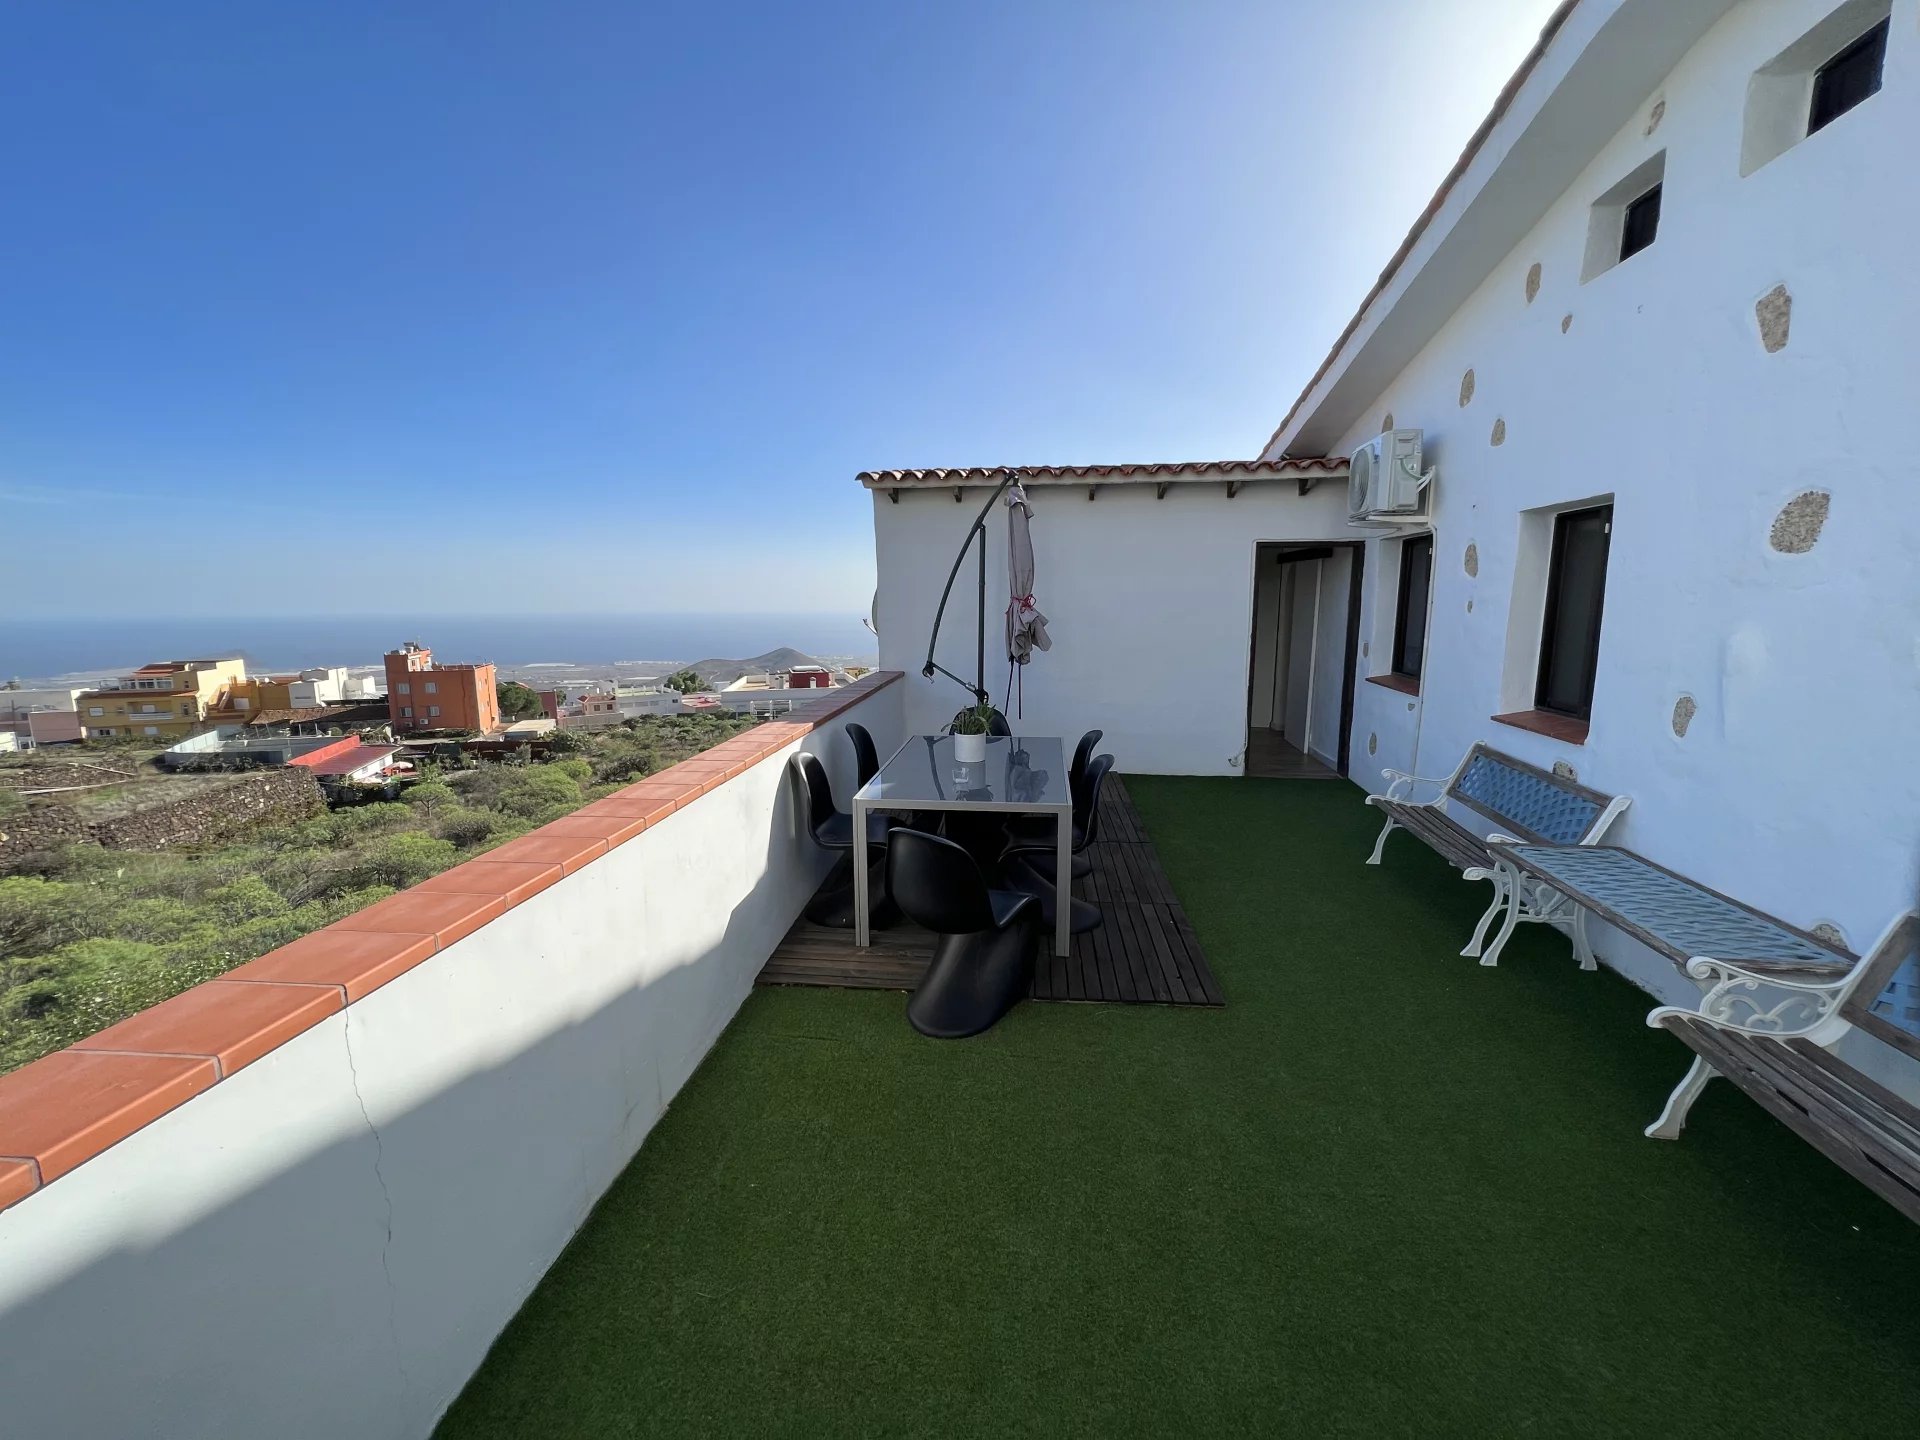 For sale, 264m2 villa with sea and mountain views in San Miguel de Abona, with a 1200m2 plot.